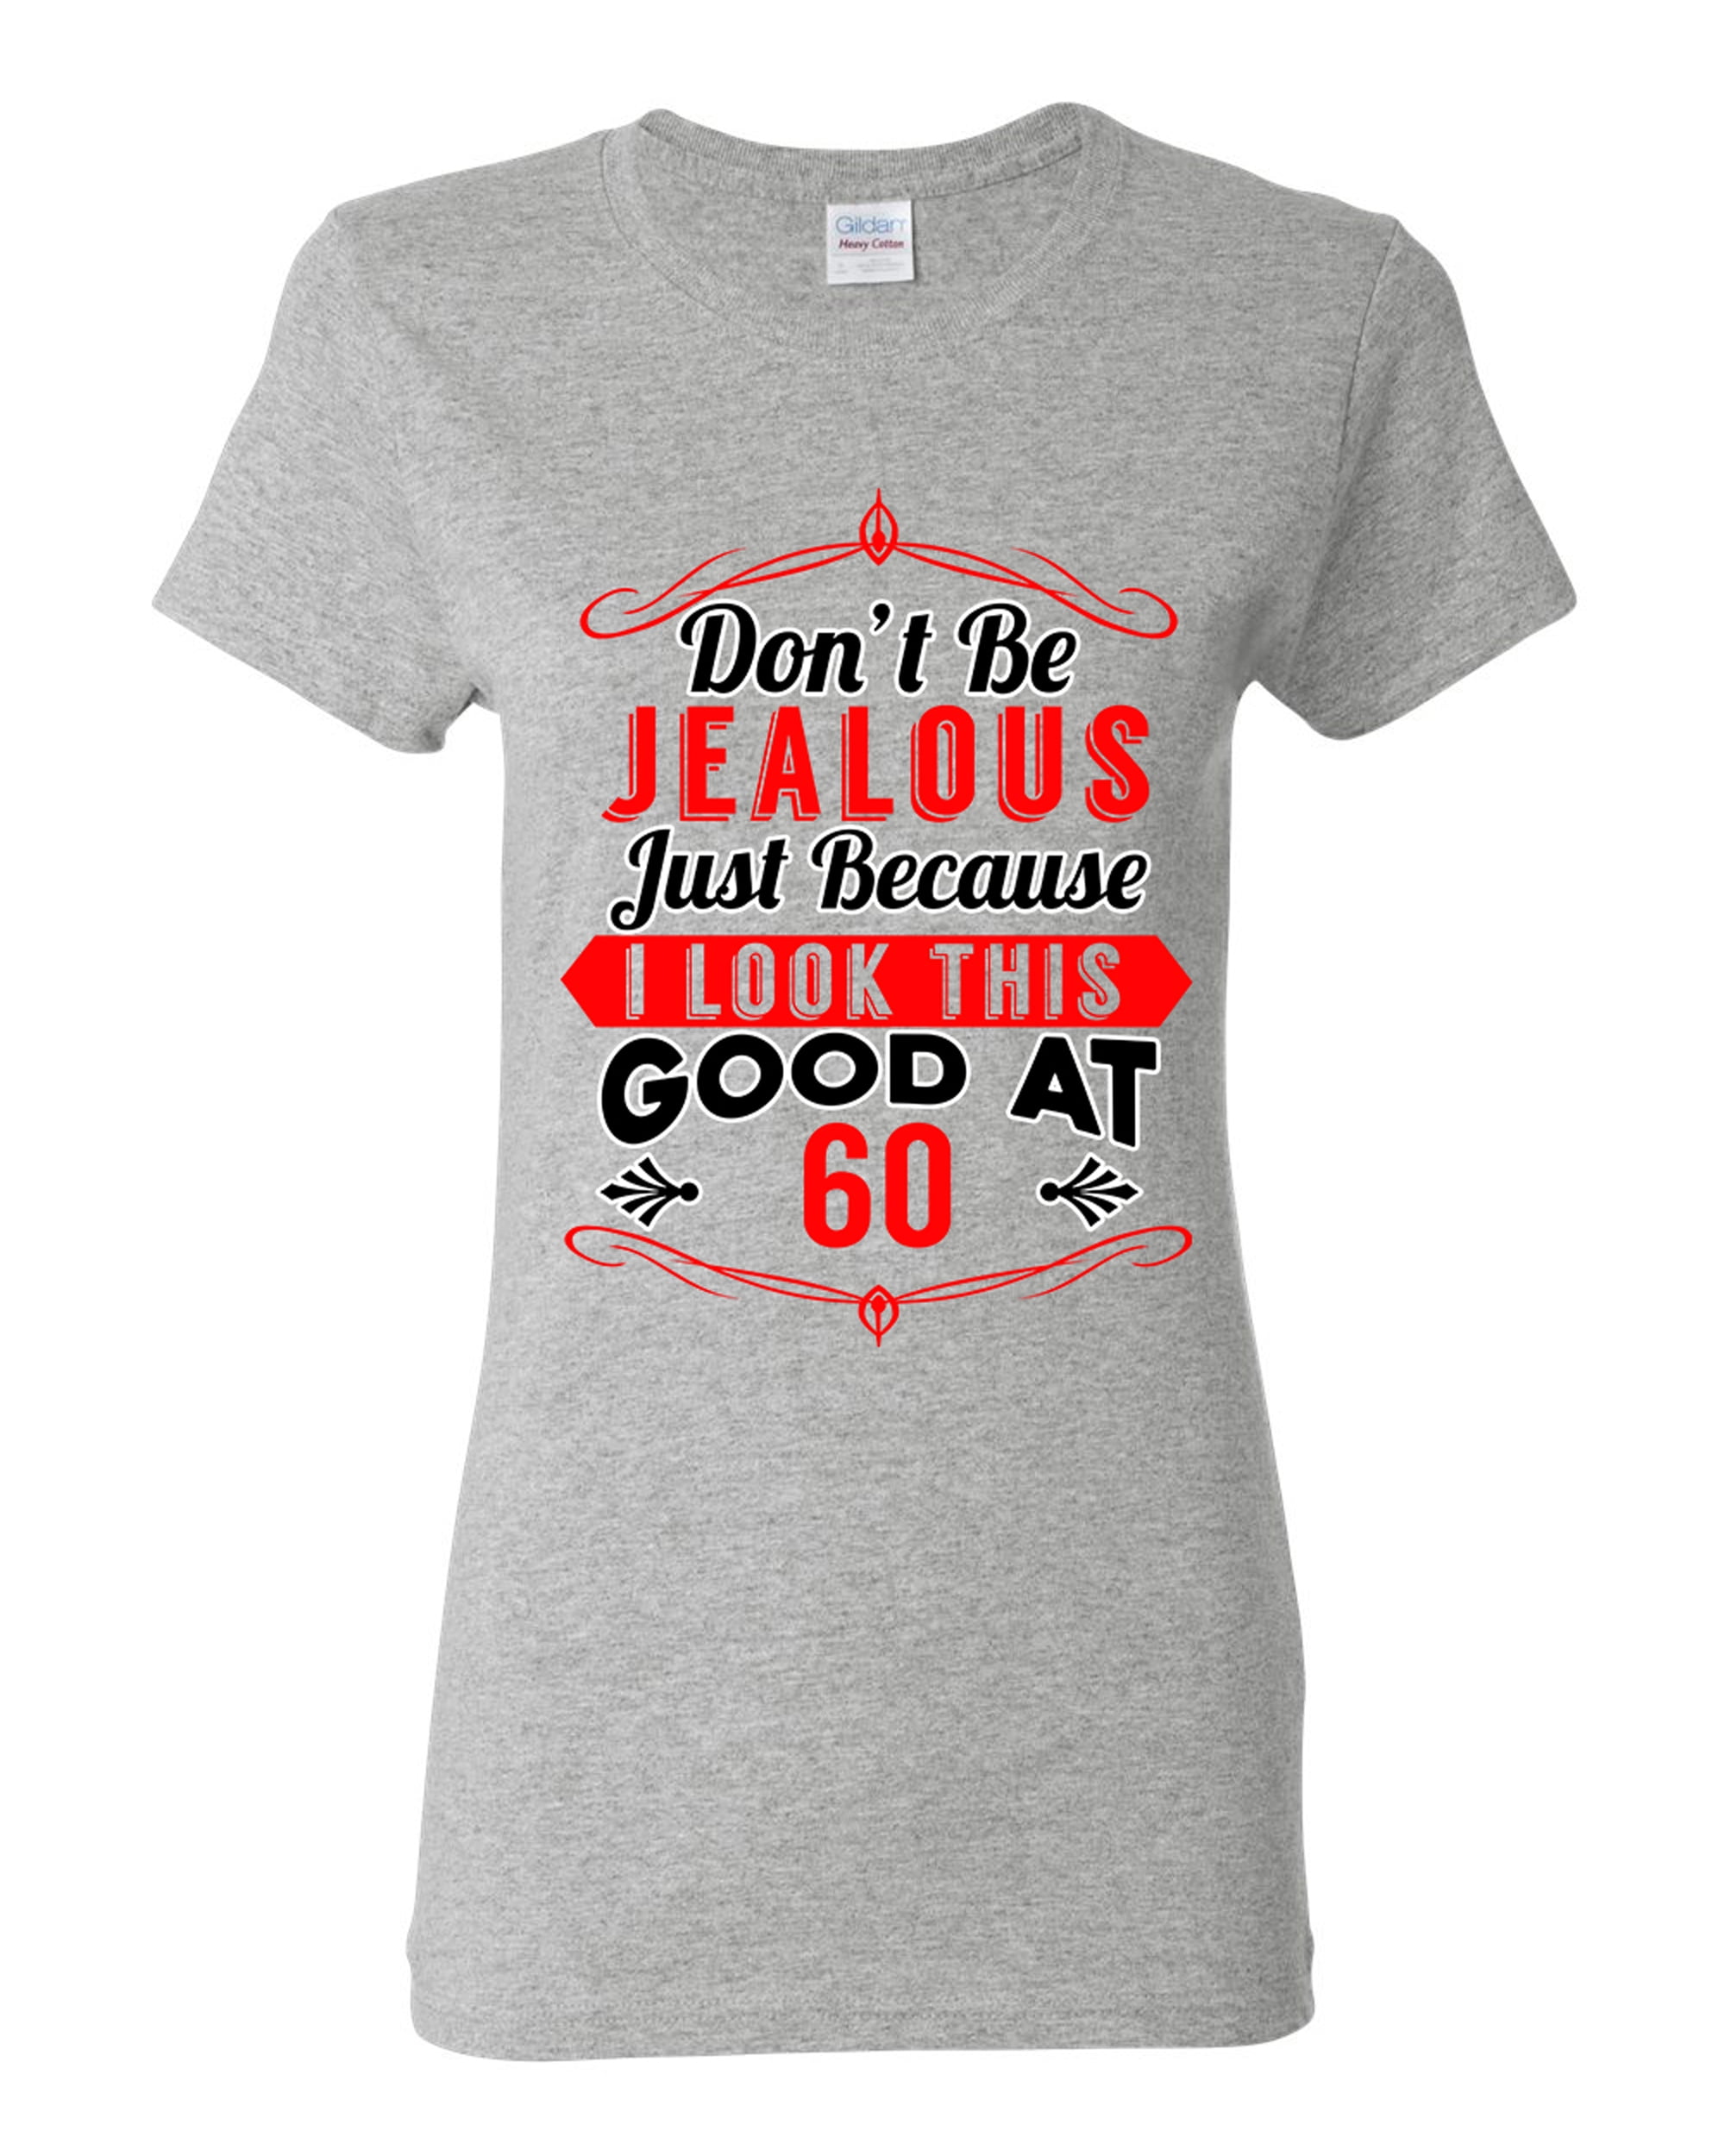 Ladies Don't Be Jealous Just Because I Look This Good At 60 Funny DT  T-Shirt Tee